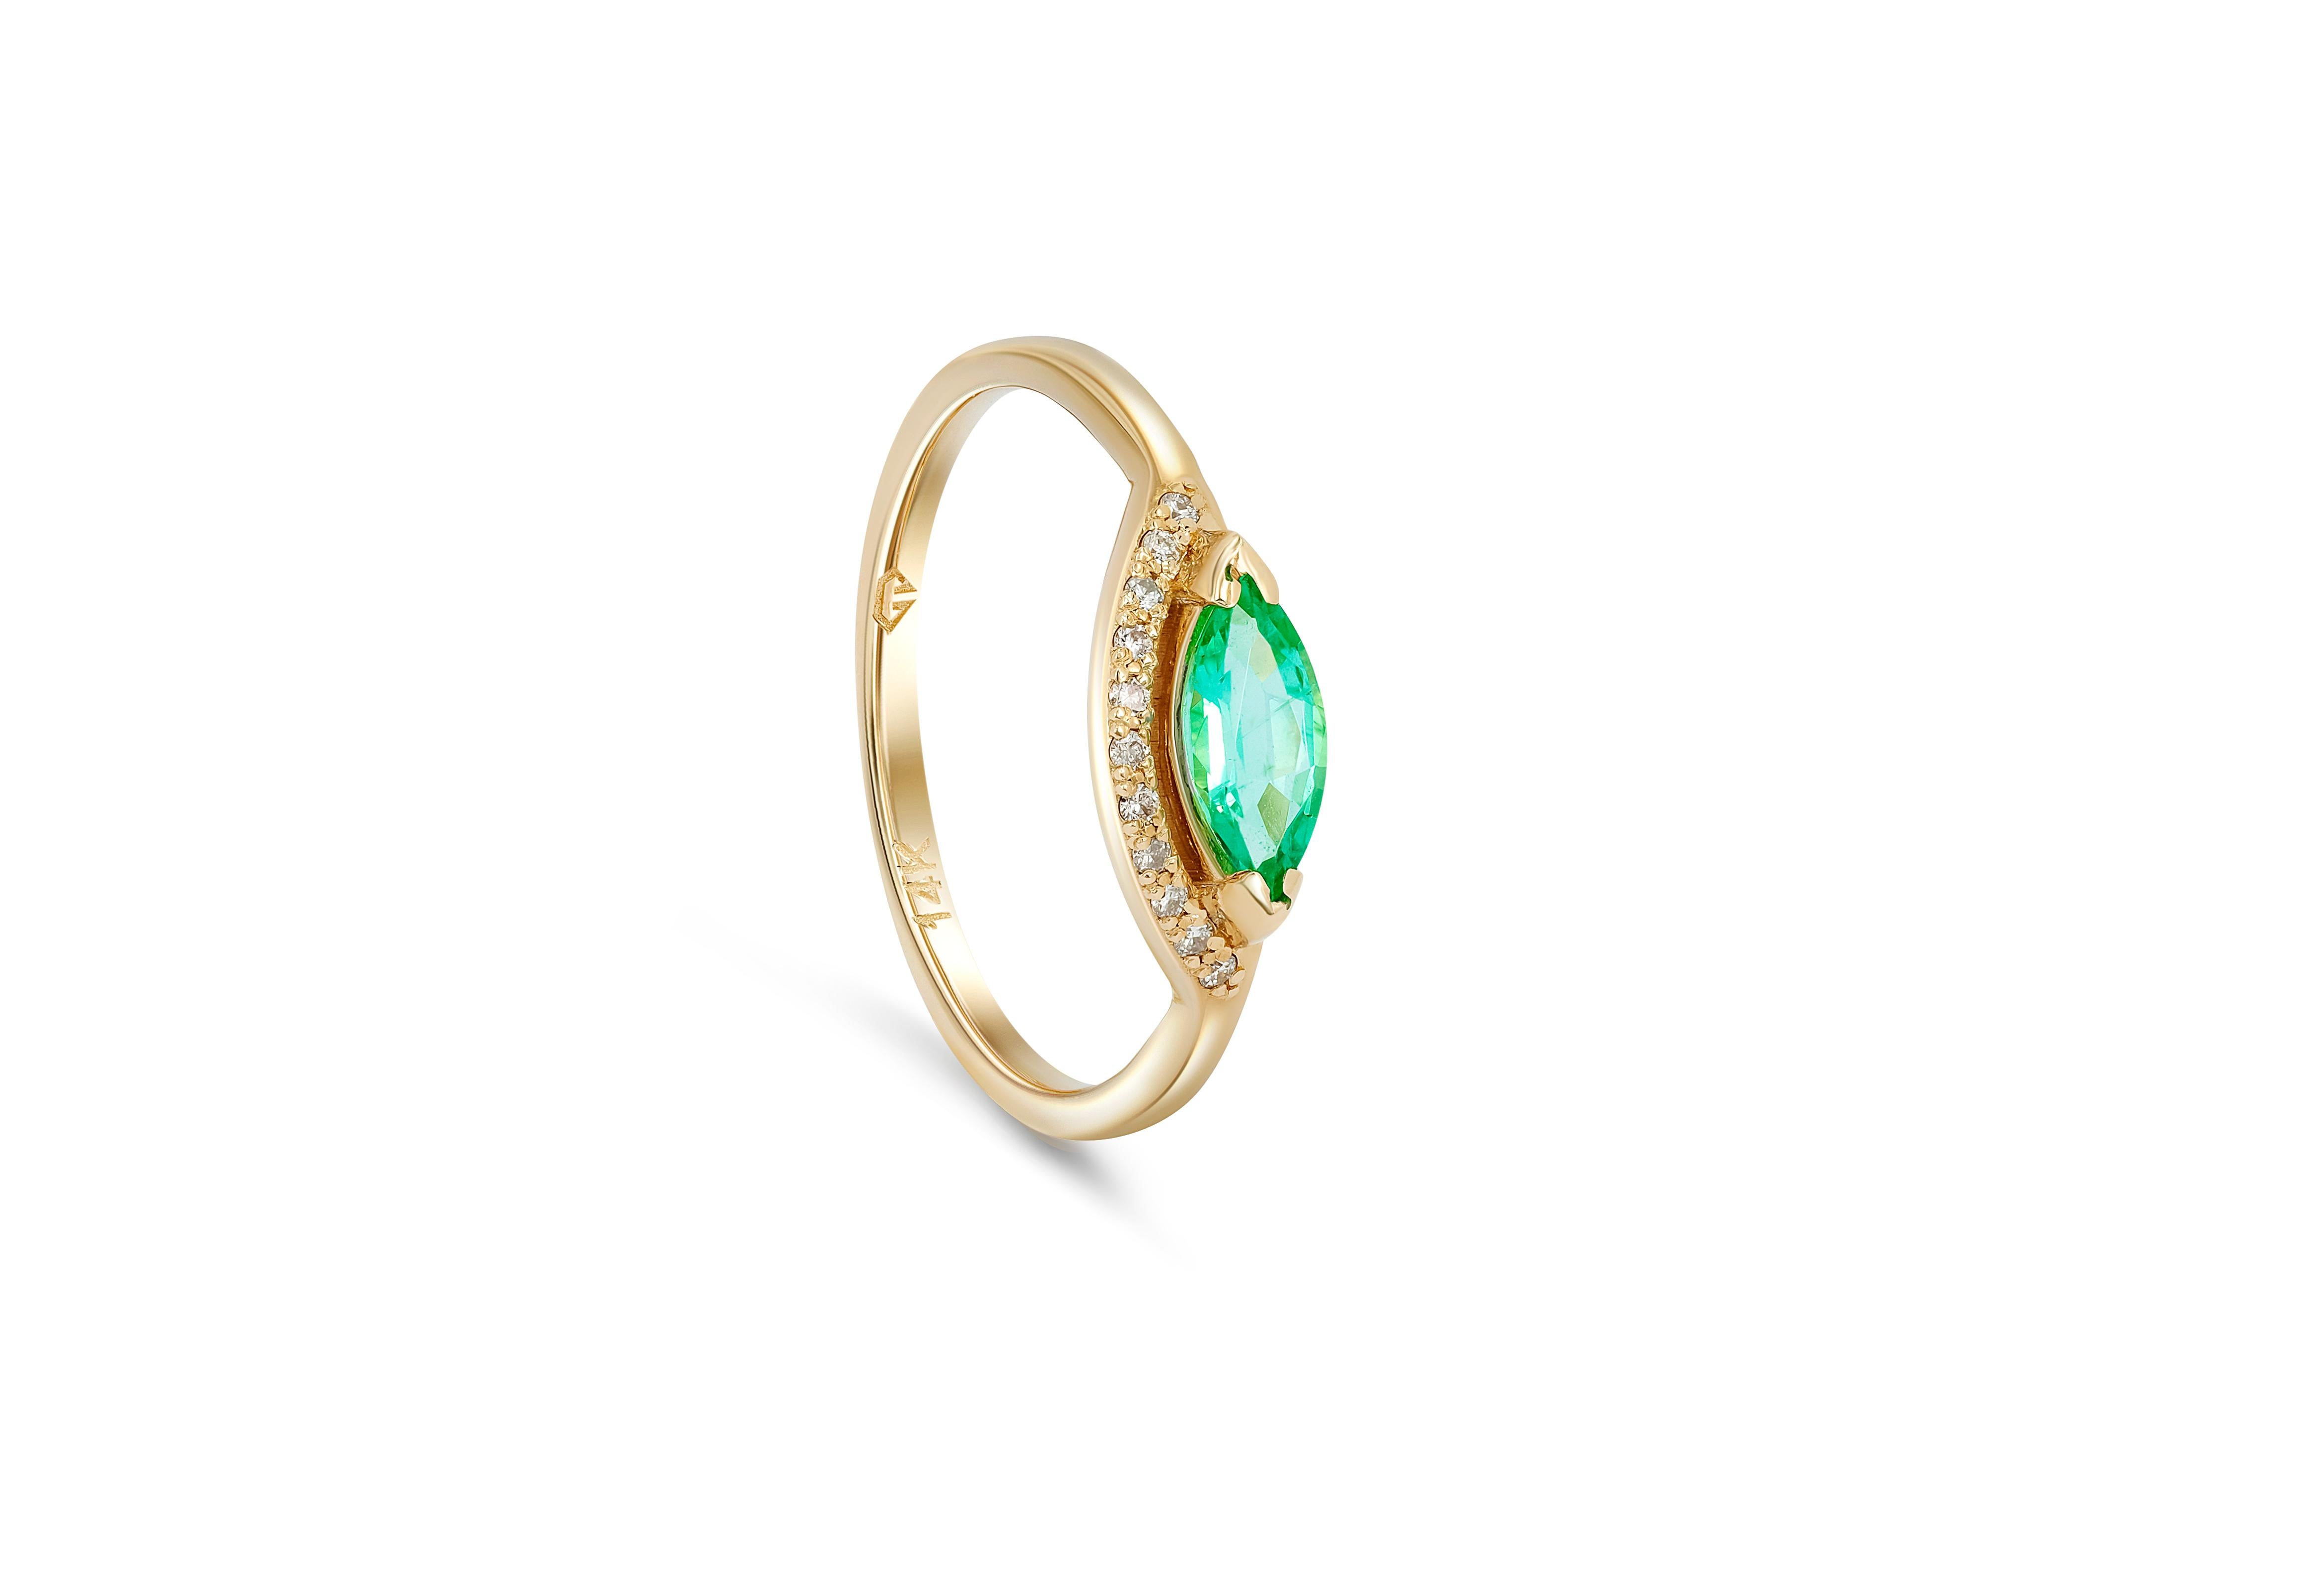 Marquise Emerald Ring. 
Emerald Ring in 14k Gold. Emerald engagement ring. May Birthstone. Emerald gold ring. Statement gemstone ring. 

Metal: 14k gold
Weight: 2.03 g. depends from size.

Set with emerald , color - green
Marquise cut, 0.70 ct. in